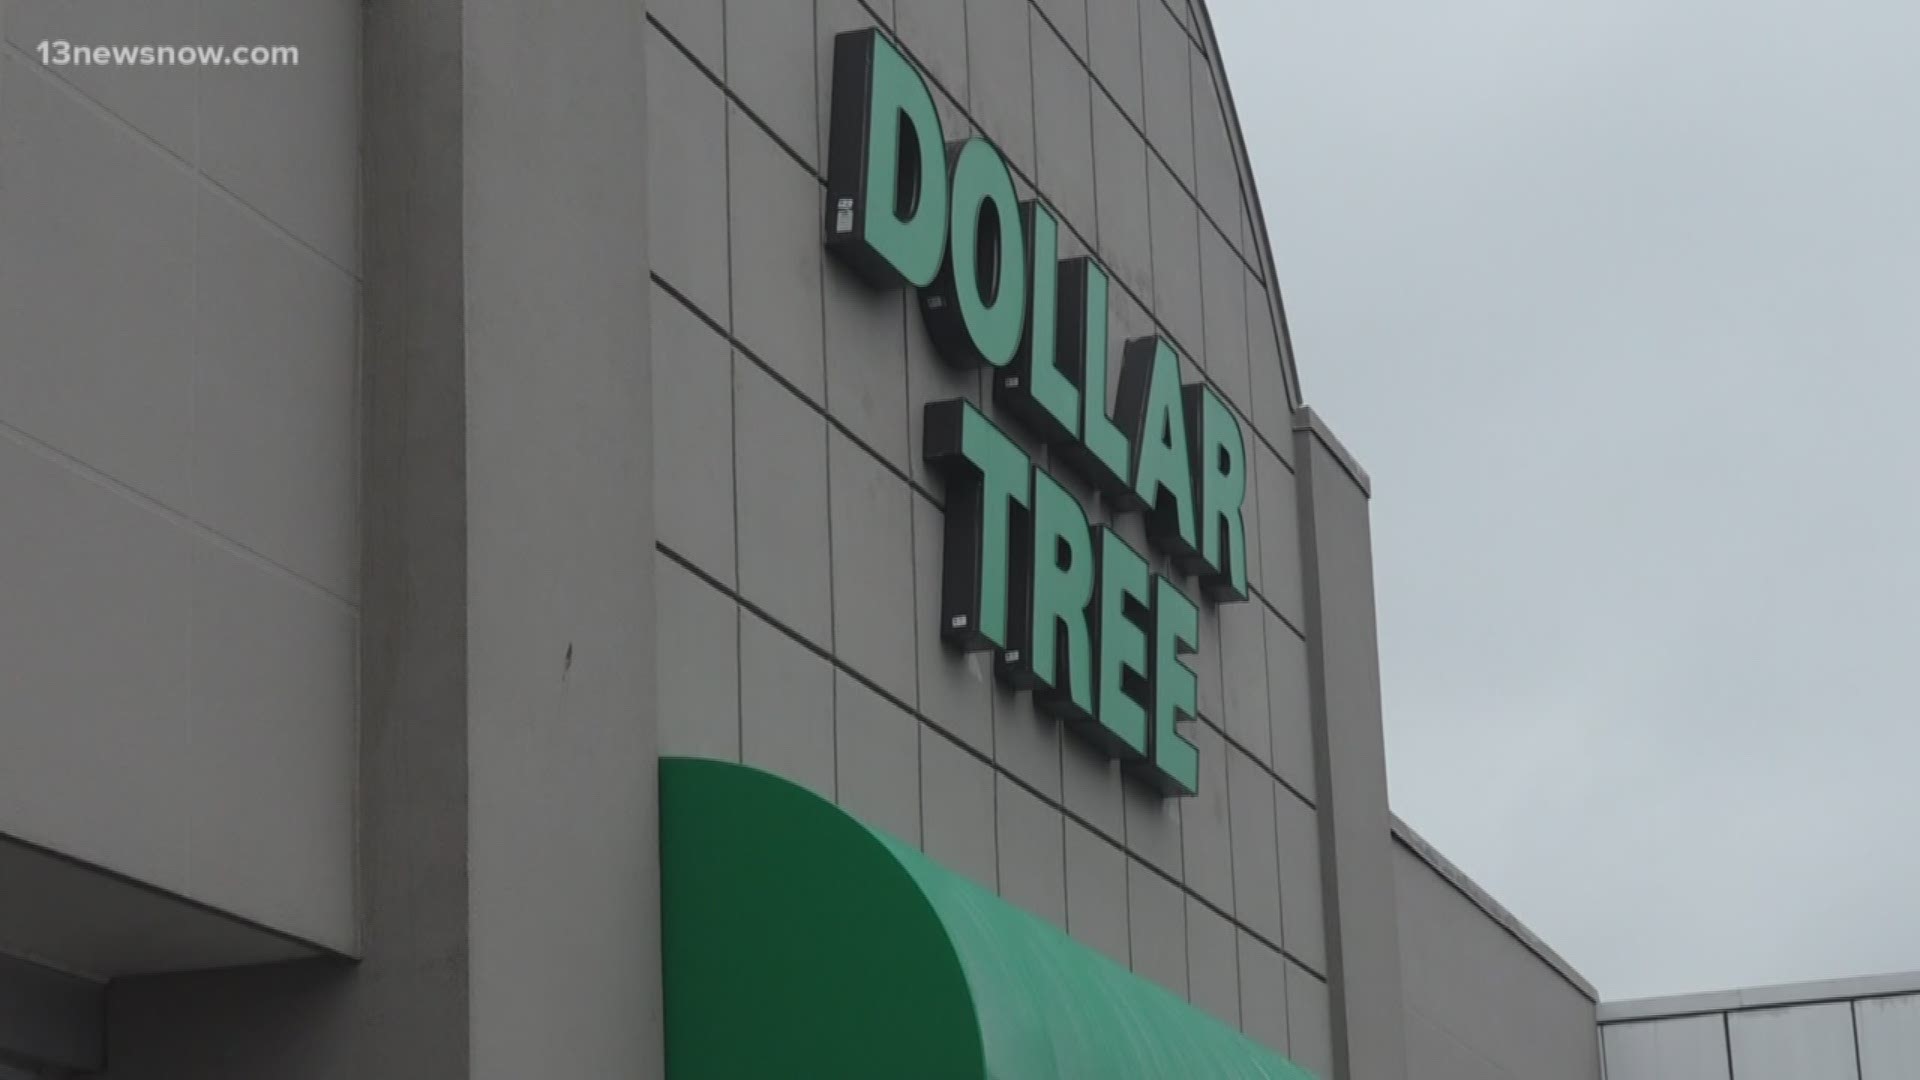 Mayra Perez, a Marlin woman who survived and recovered from COVID-19 said she was told that she can no longer shop at her local Dollar Tree.